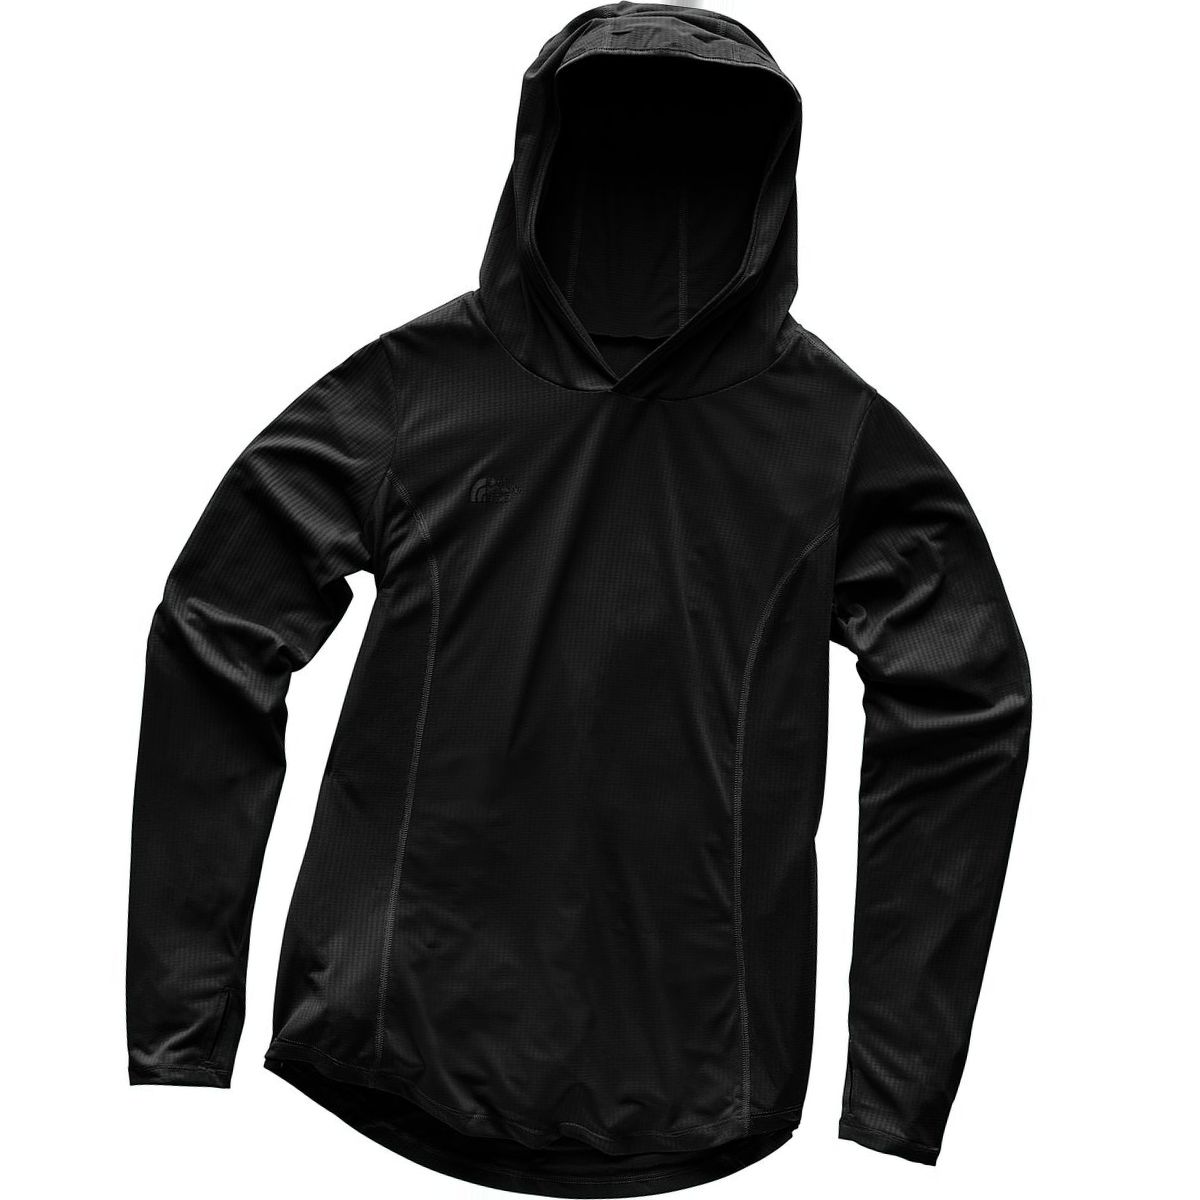 The North Face 24/7 Hoodie - Women's